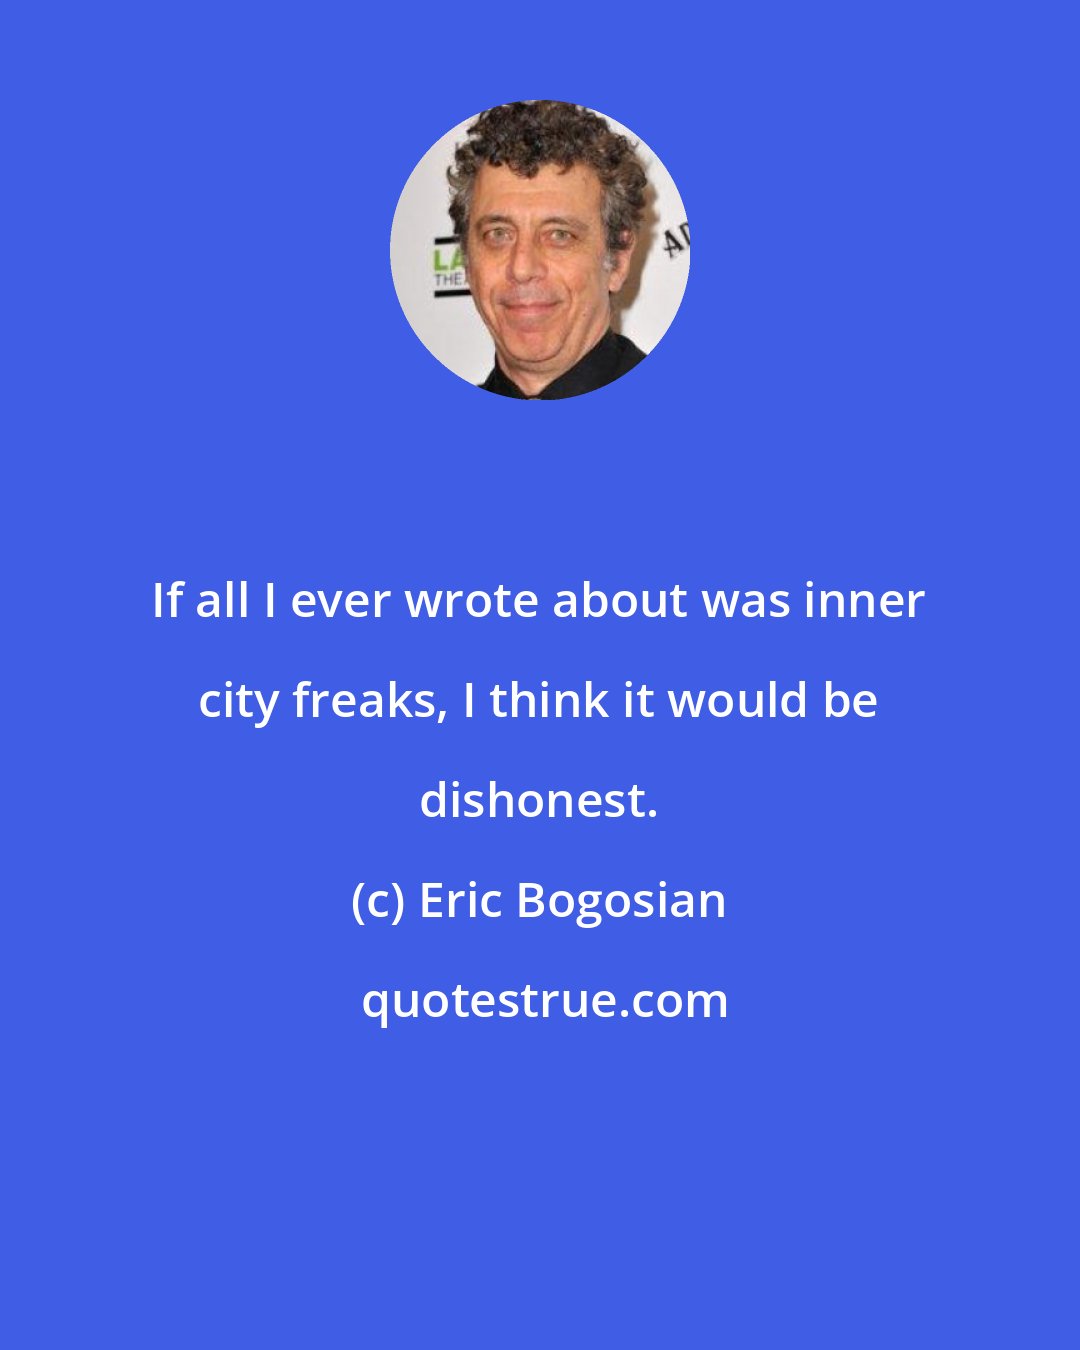 Eric Bogosian: If all I ever wrote about was inner city freaks, I think it would be dishonest.